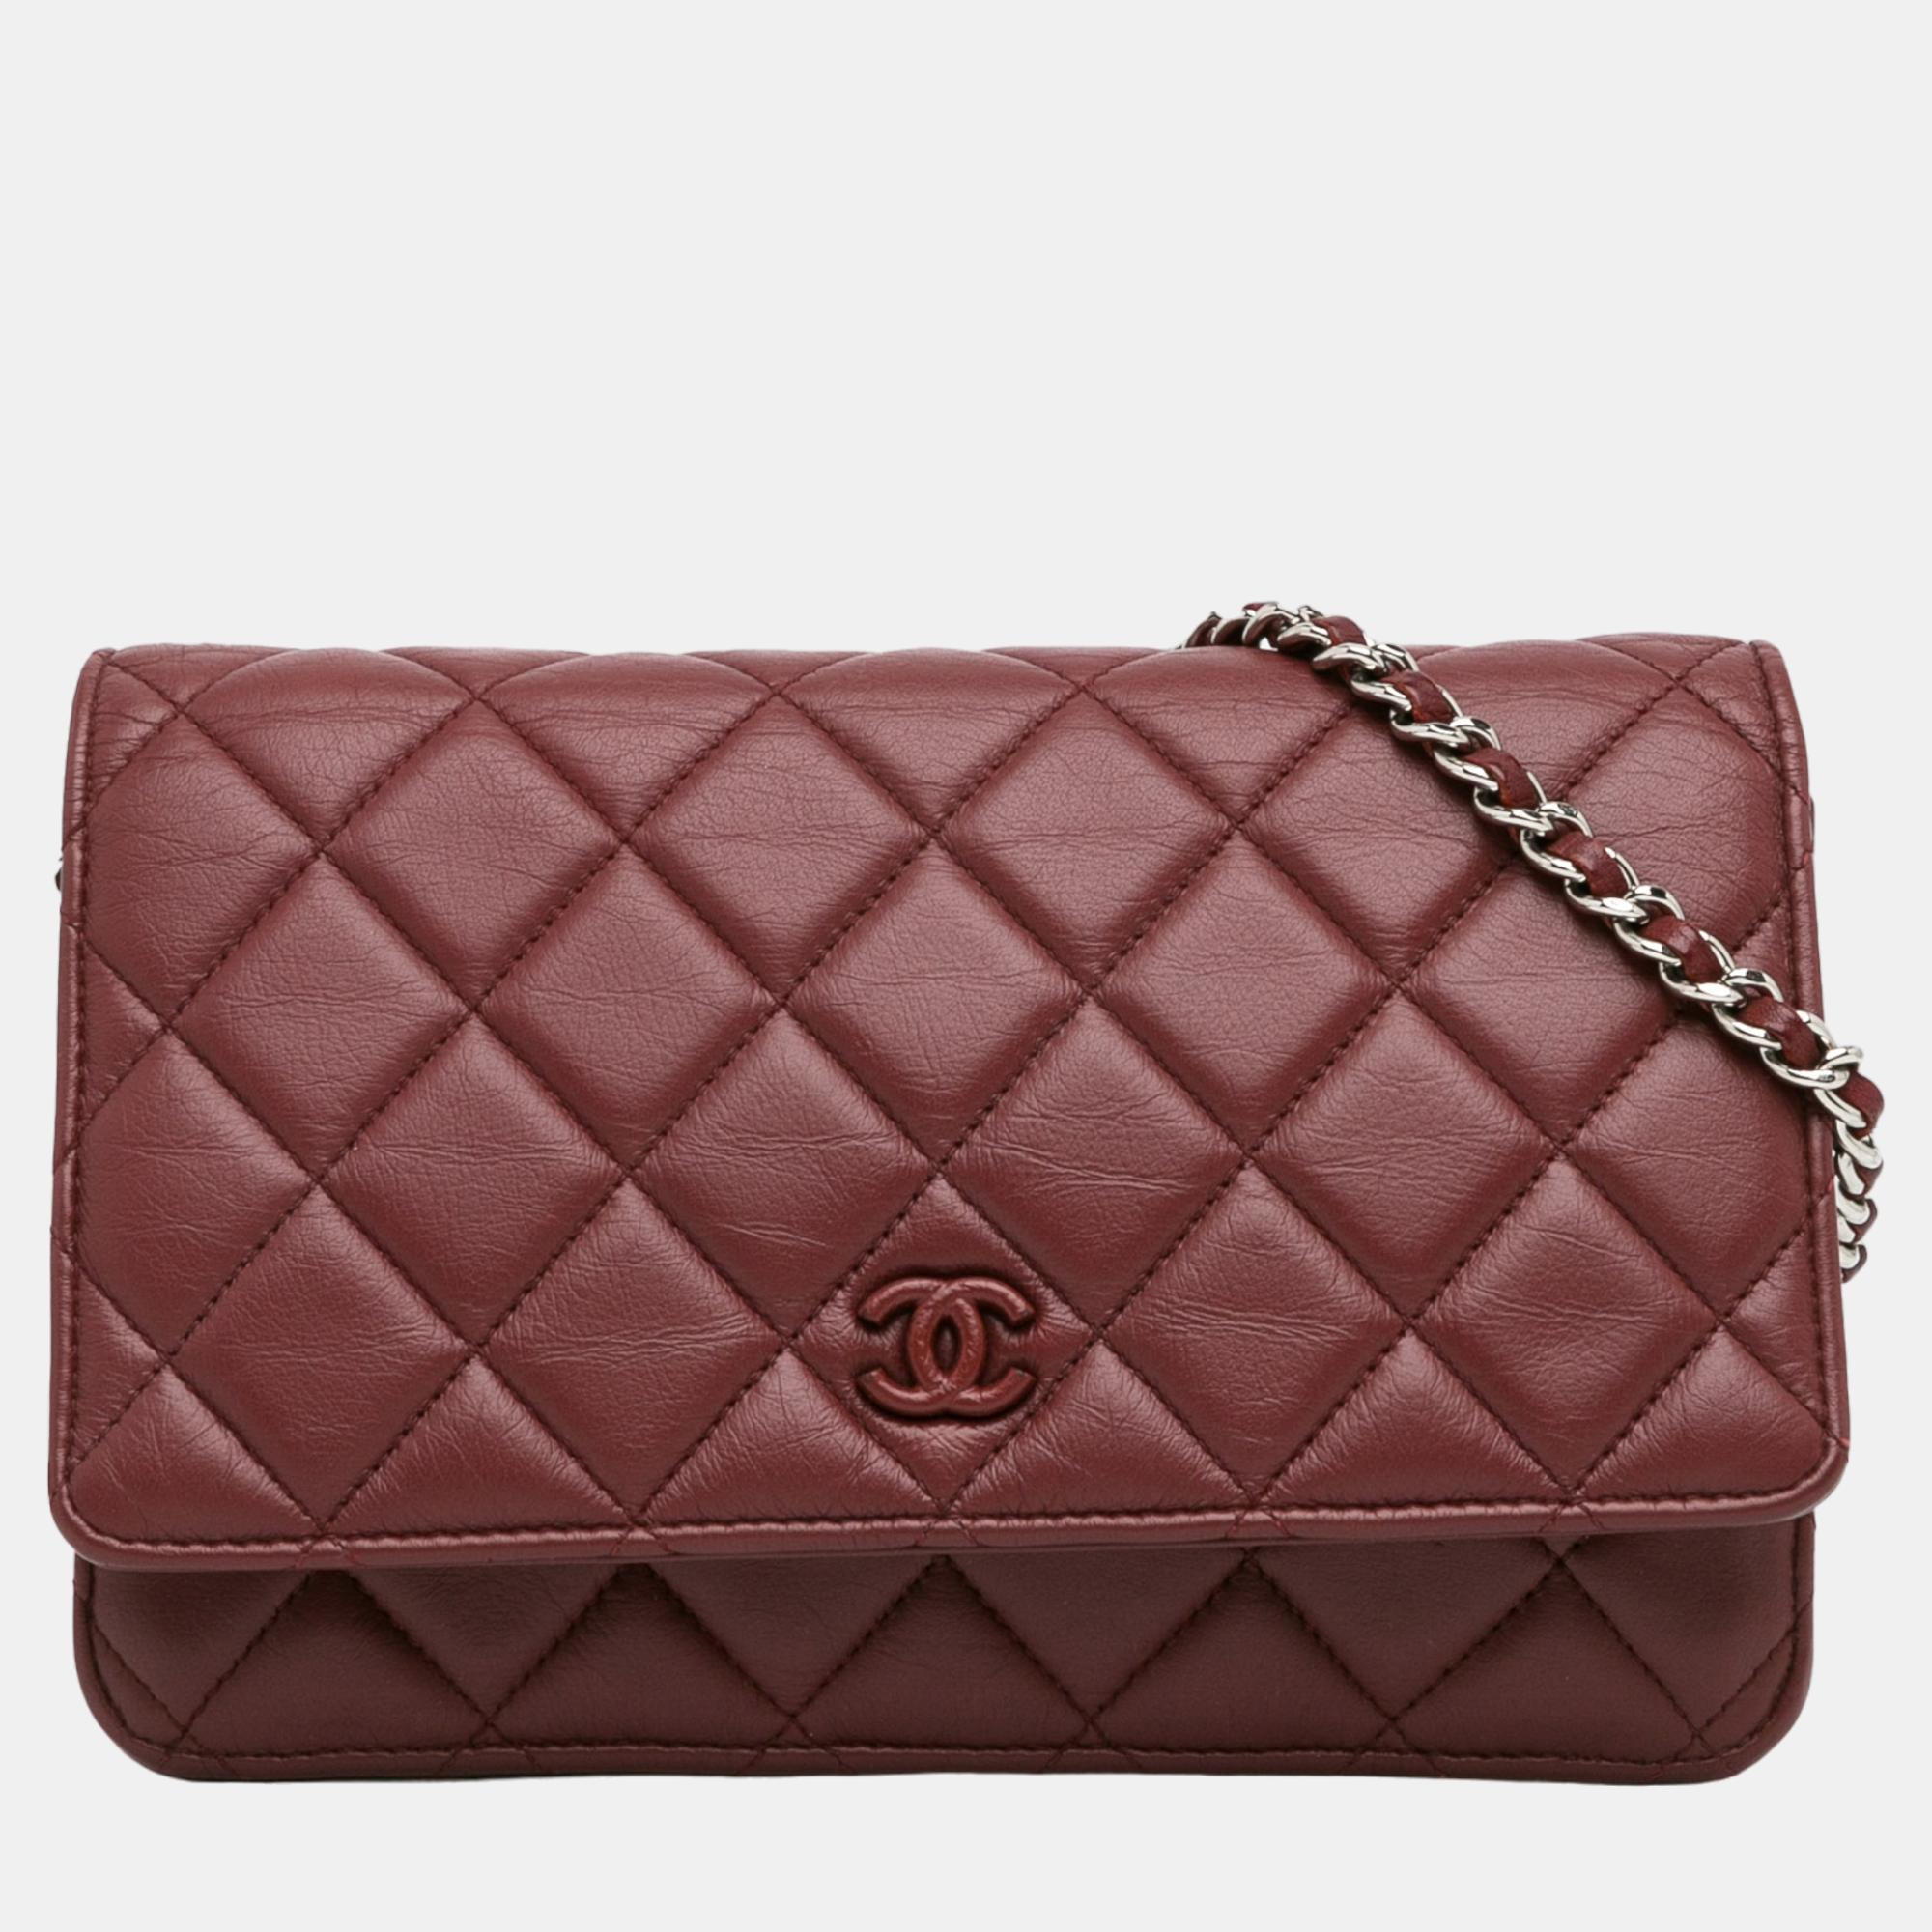 Chanel red classic lambskin wallet on chain